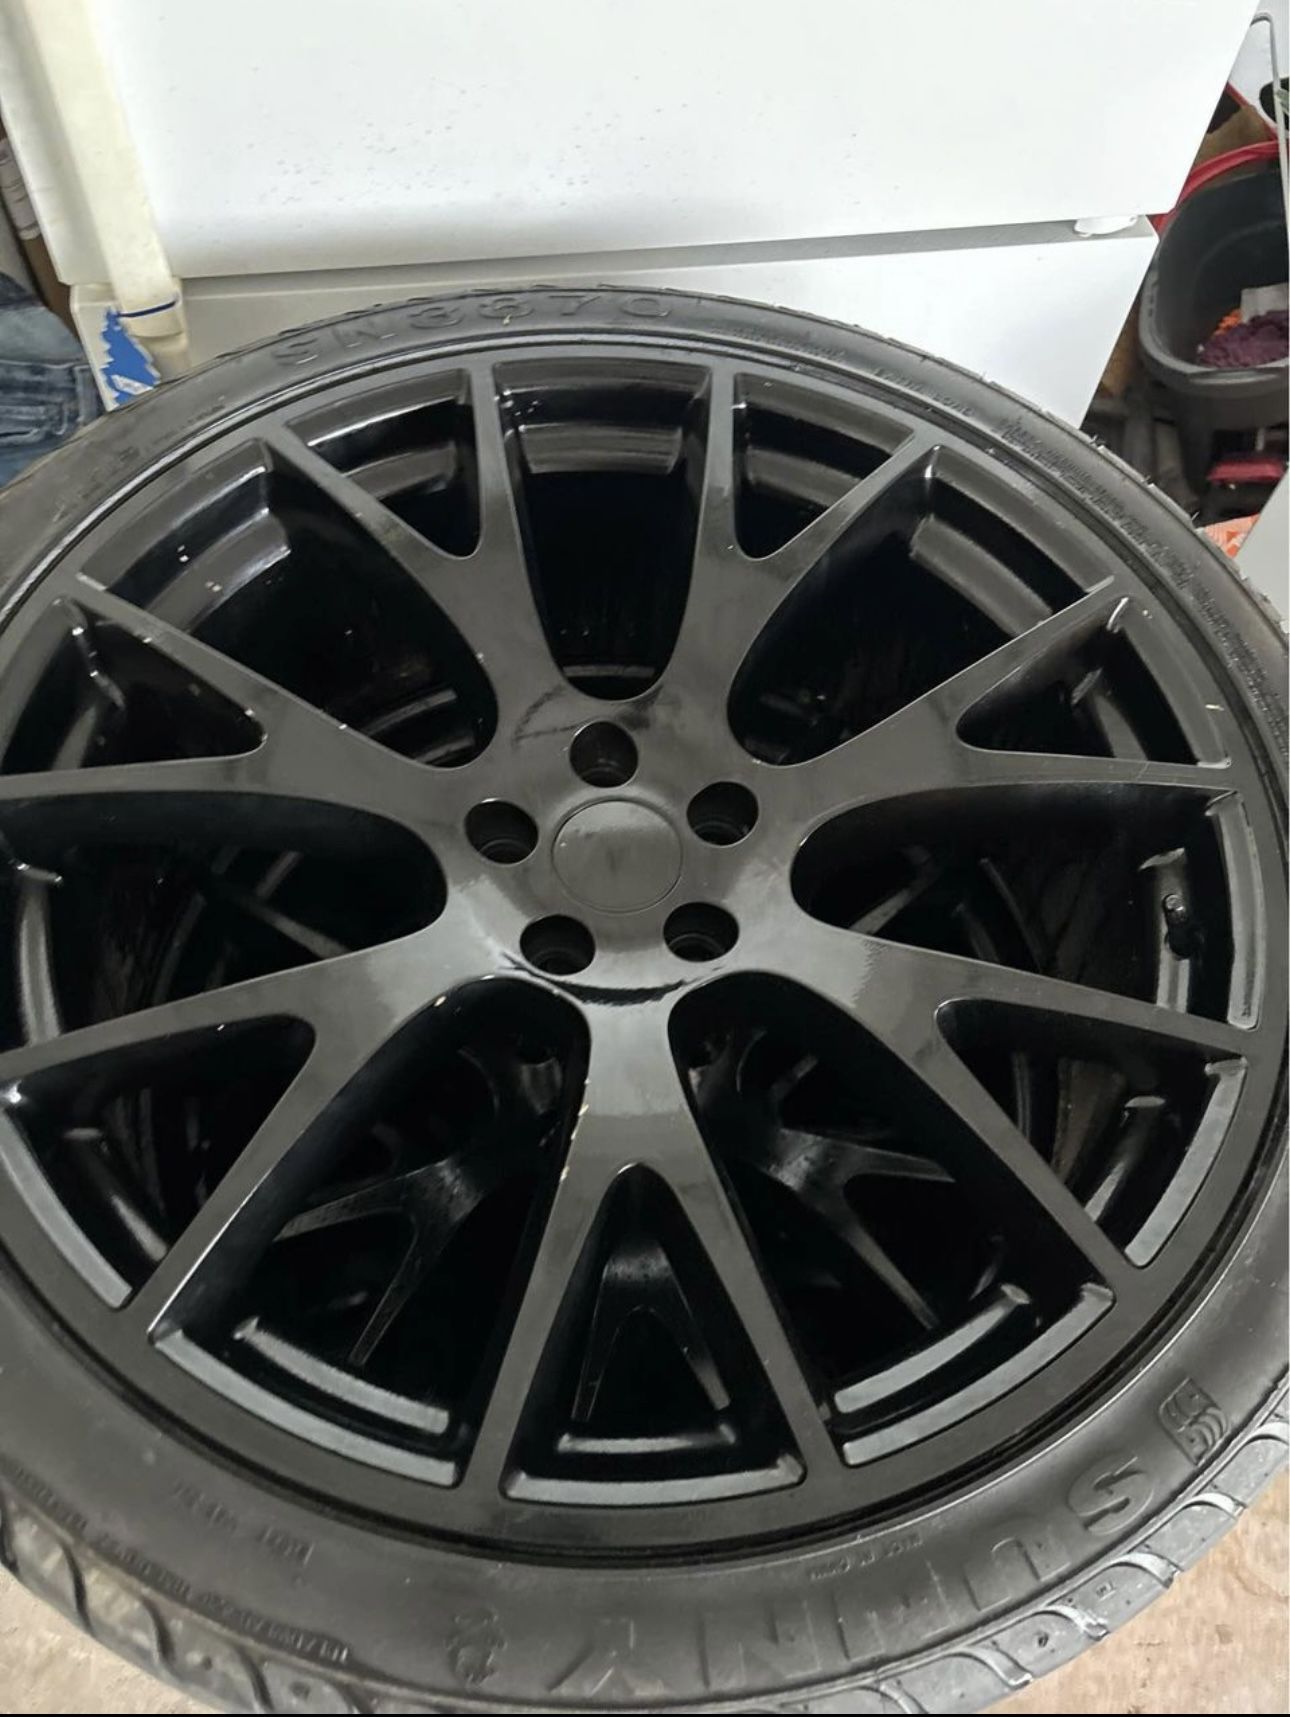 hellcat style reps $650 obo